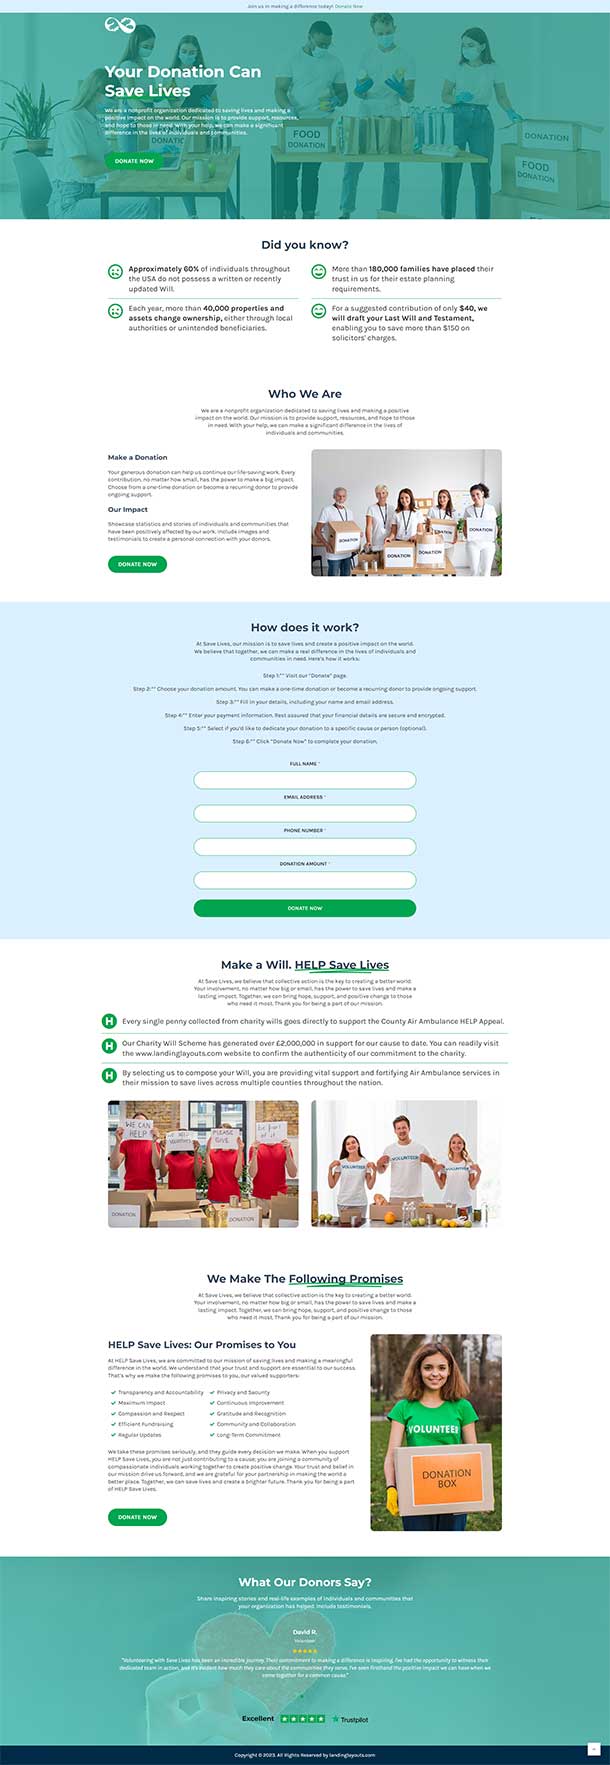 Best Charity And Donation Lead Generation Landing Page